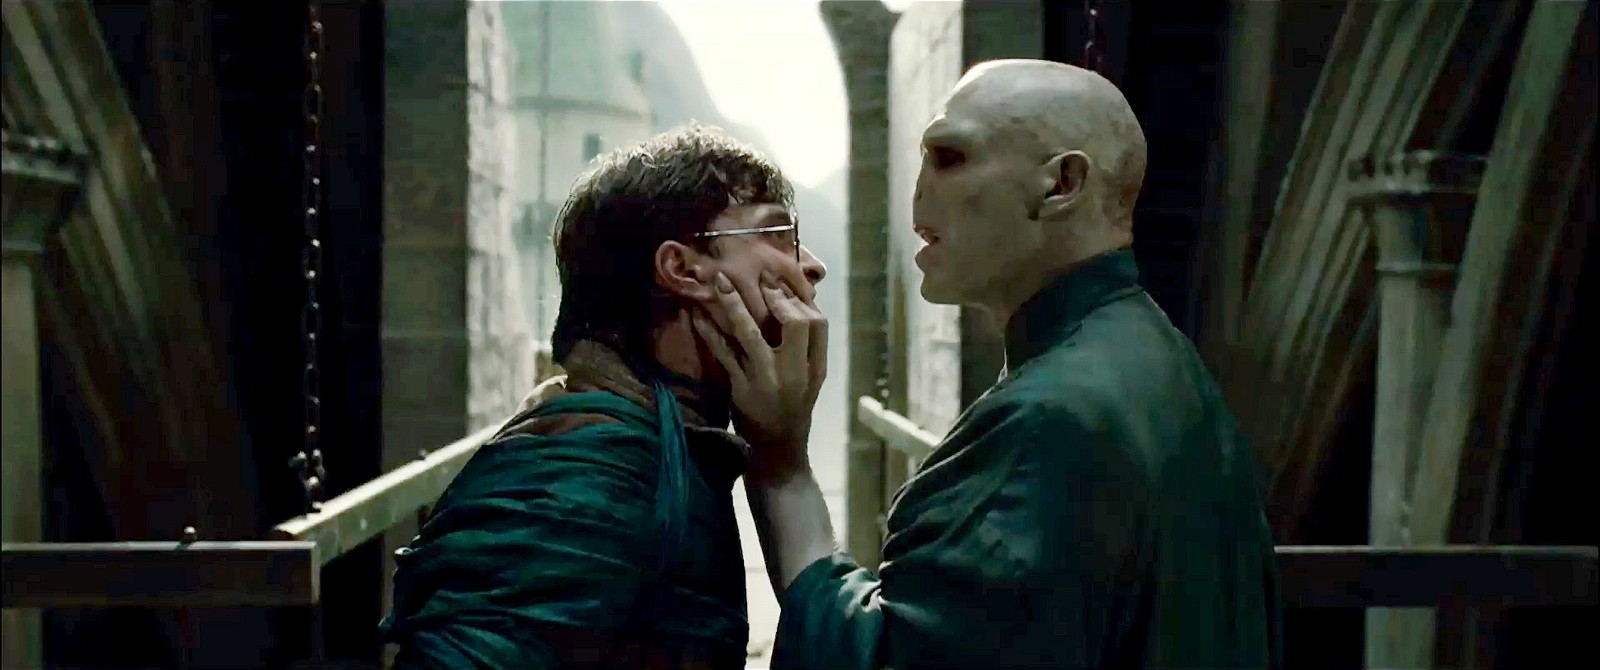 A still from Harry Potter and the Deathly Hallows Part 2